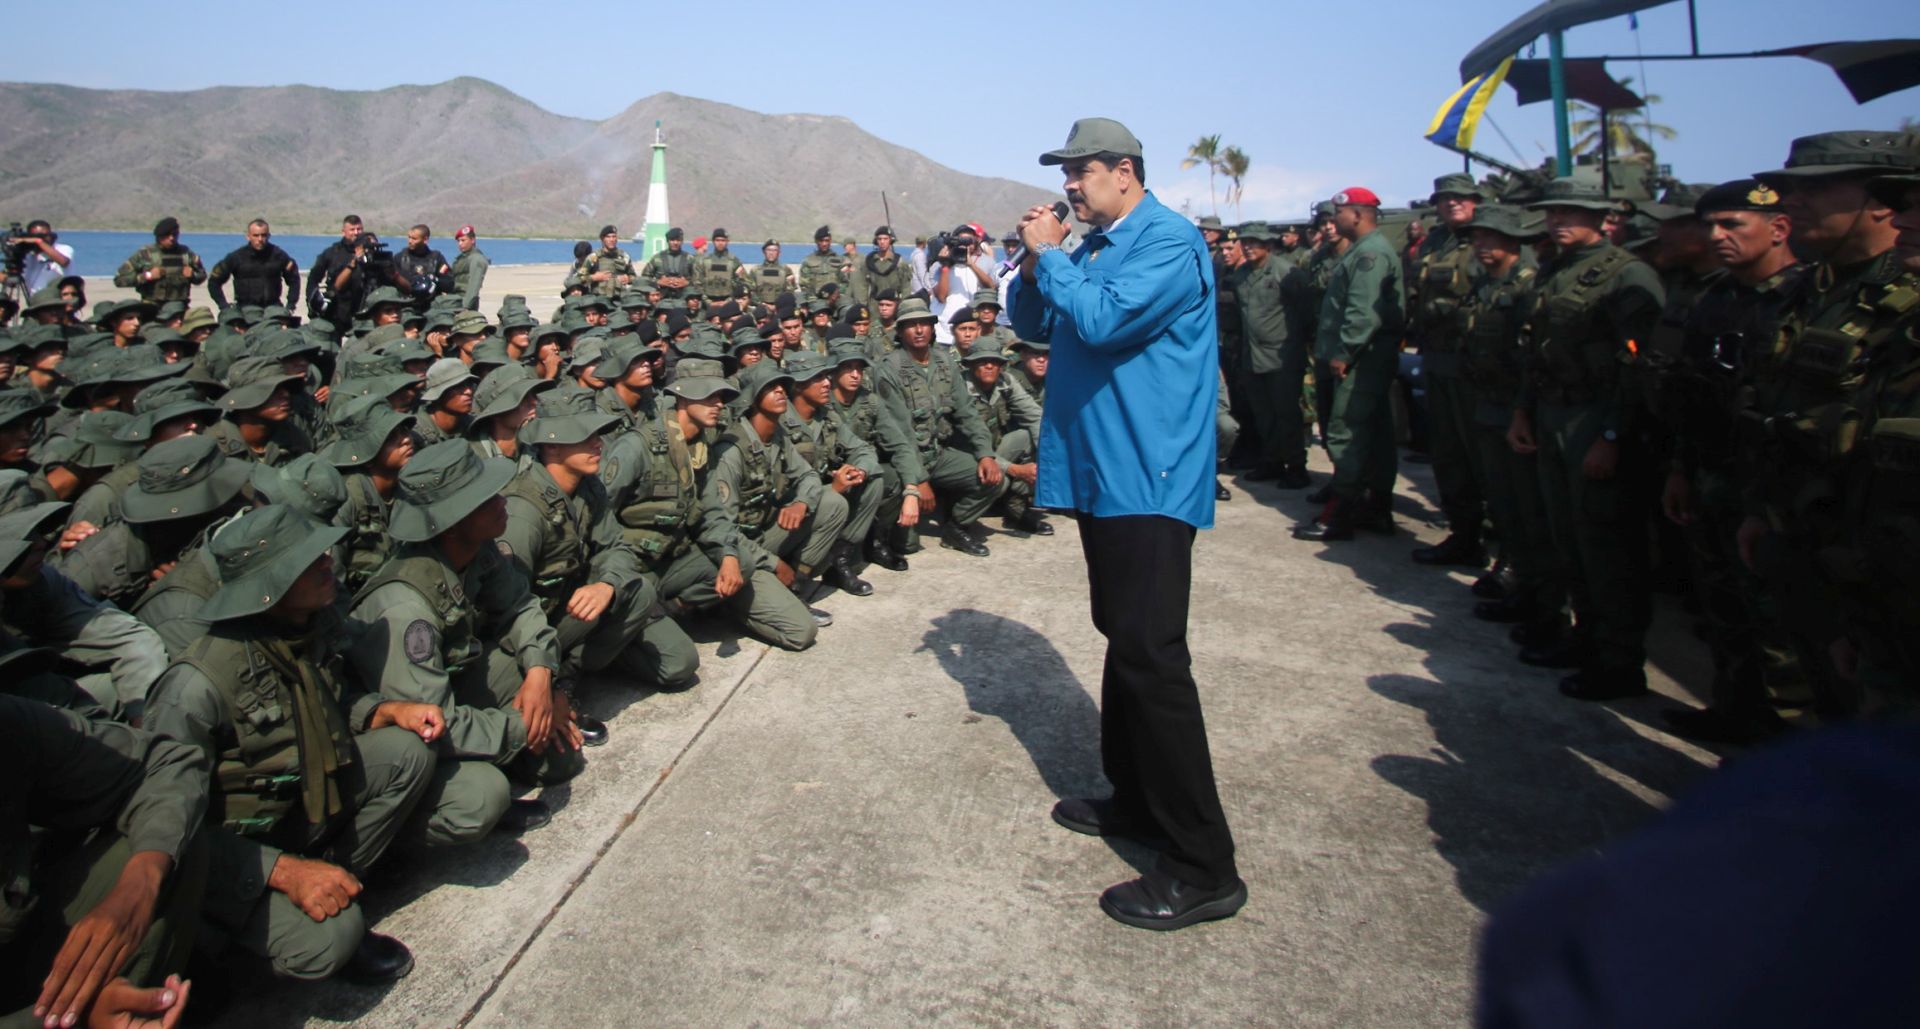 epa07341099 A handout picture provided by the Miraflores press office that shows Venezuelan President Nicolas Maduro (C) during an event with members of the military, in Turiamo, Venezuela, 03 February 2019, where he asked the troops to take care of the 'union' and 'loyalty' to the National Amerd Forces.  EPA/PRENSA MIRAFLORES HANDOUT  HANDOUT EDITORIAL USE ONLY/NO SALES